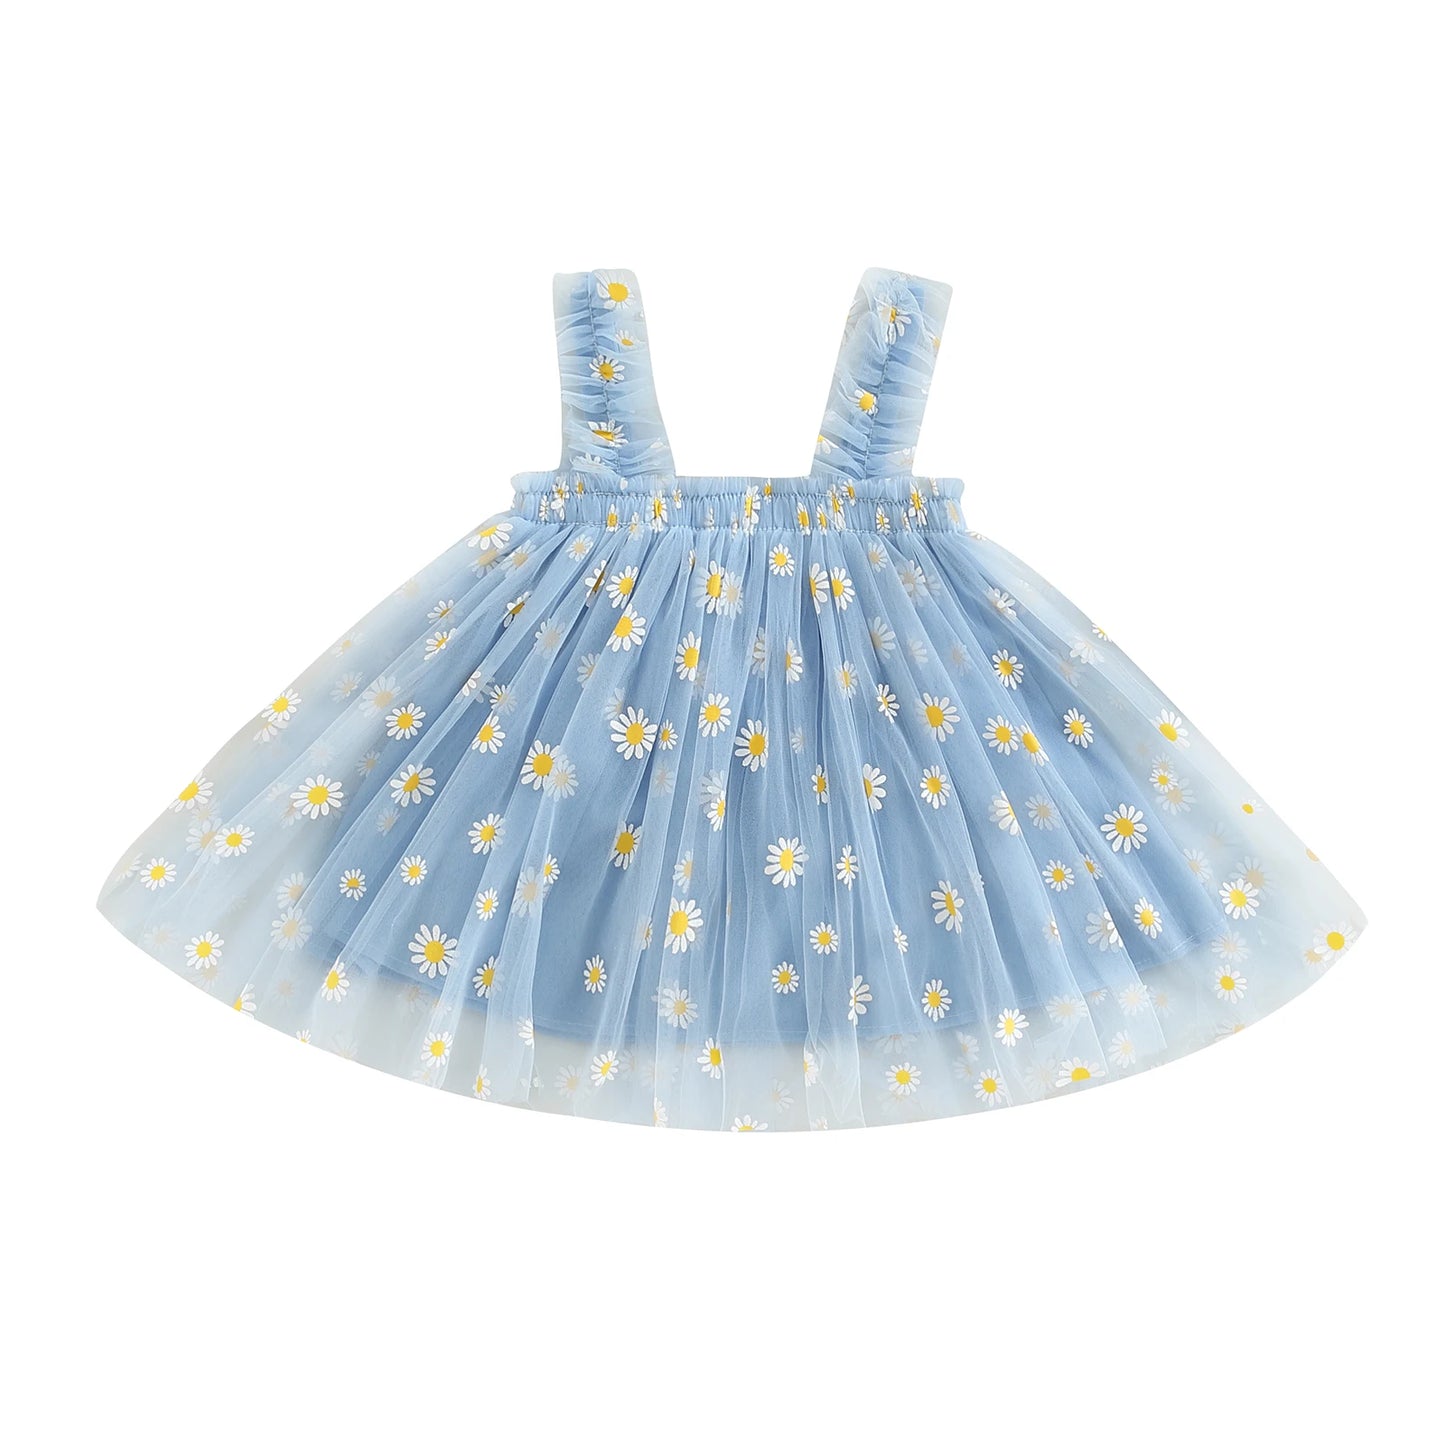 Baby 6M-5Y Toddler Kid Baby Girls Tulle Dress, Daisy Dresses For Girls Party Beach Holiday